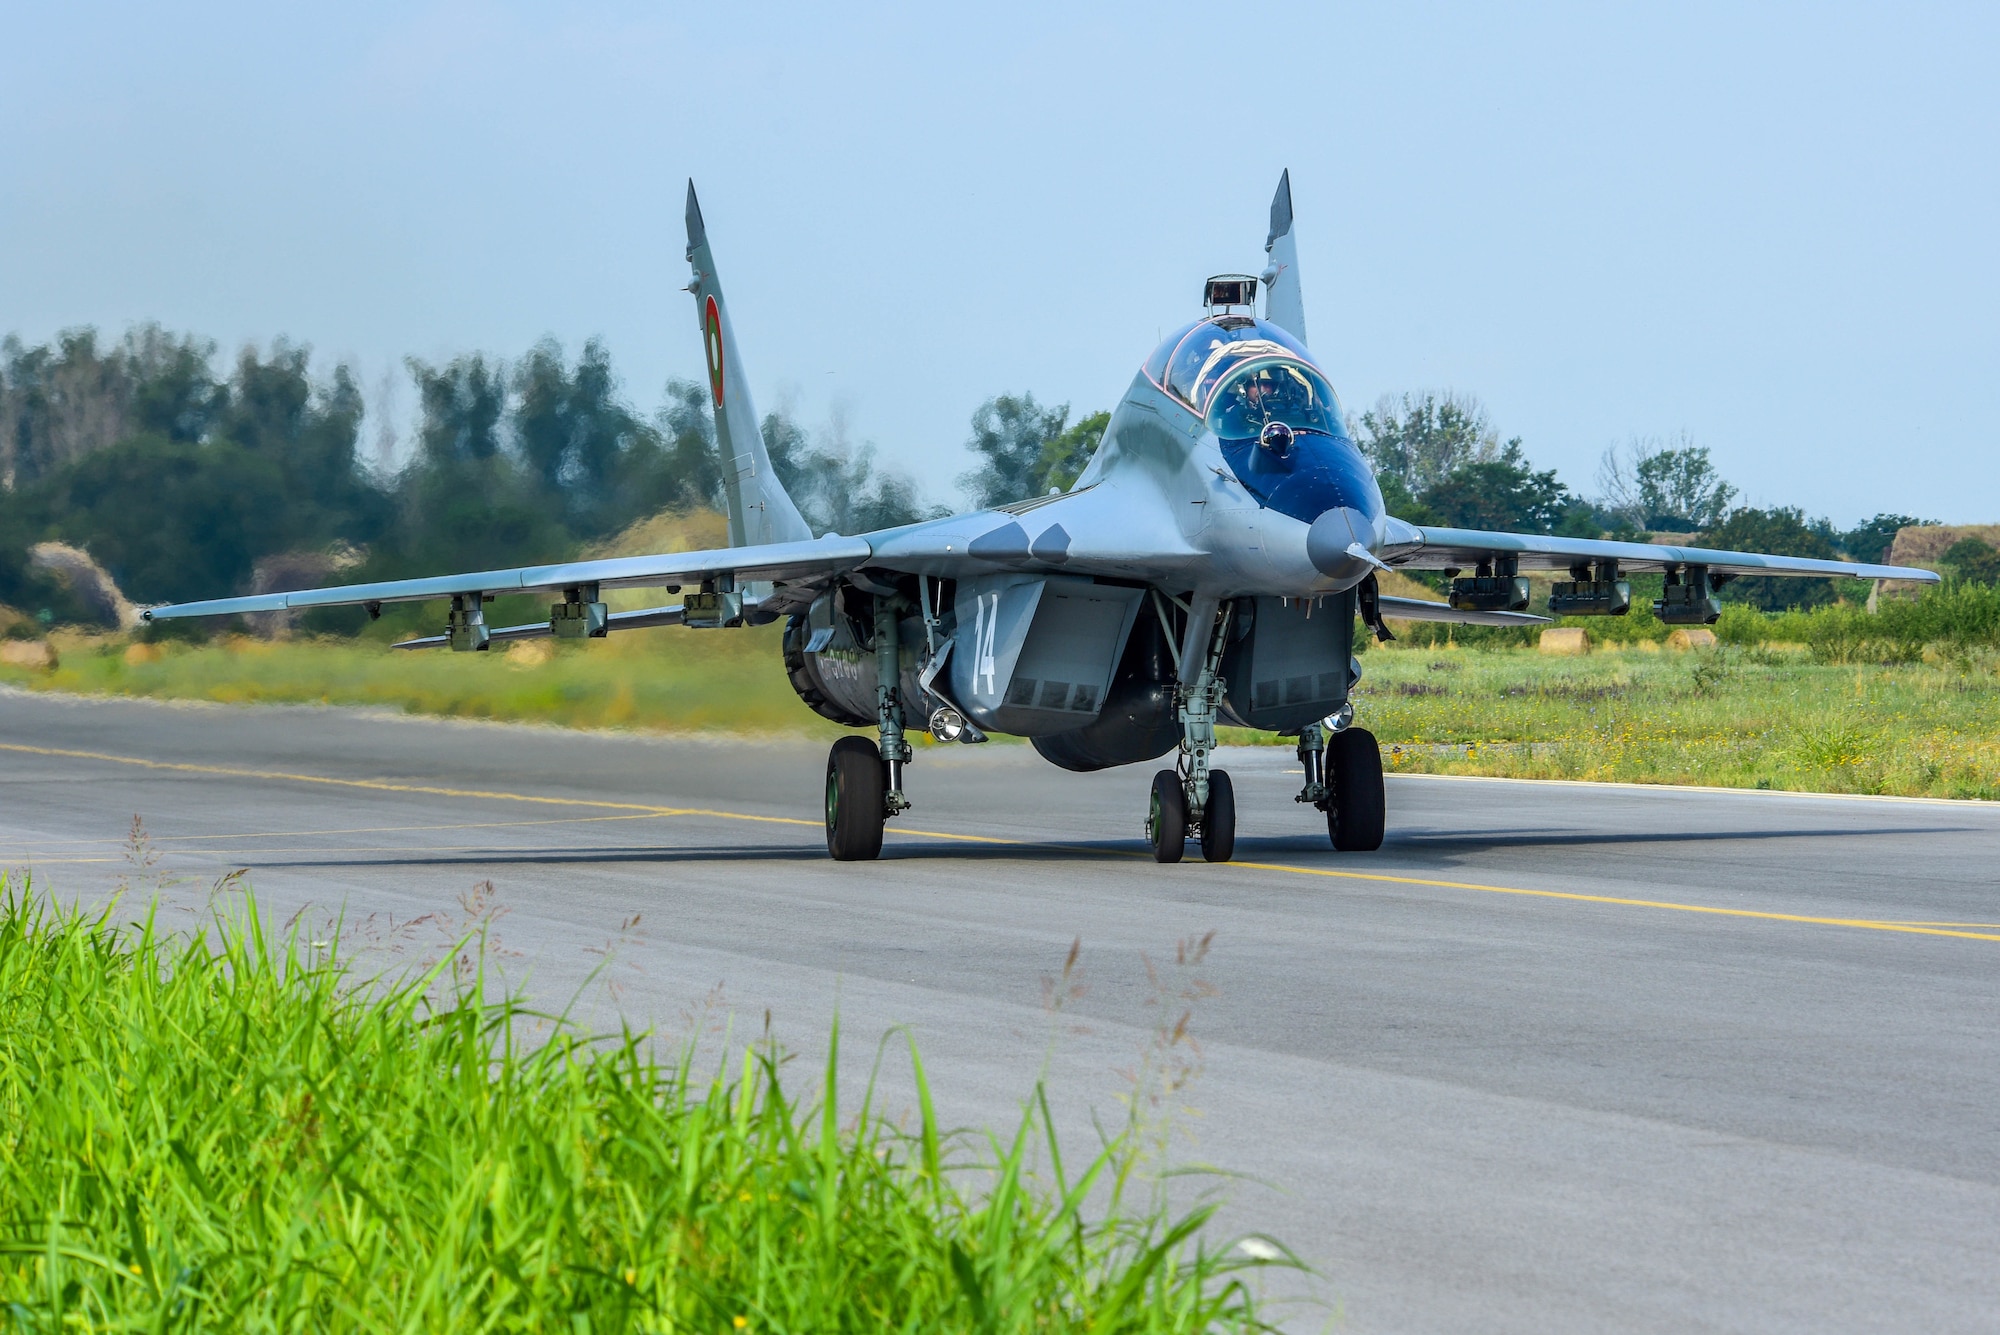 A Bulgarian air force MiG-29 taxis on the flightline during Thracian Star 21 at Graf Ignatievo Air Base, Bulgaria, July 20, 2021. THS21 allowed both U.S. Airmen and Bulgarian forces to extend joint warfighting capability through operational and tactical training. (U.S. Air Force photo by Airman 1st Class Brooke Moeder)